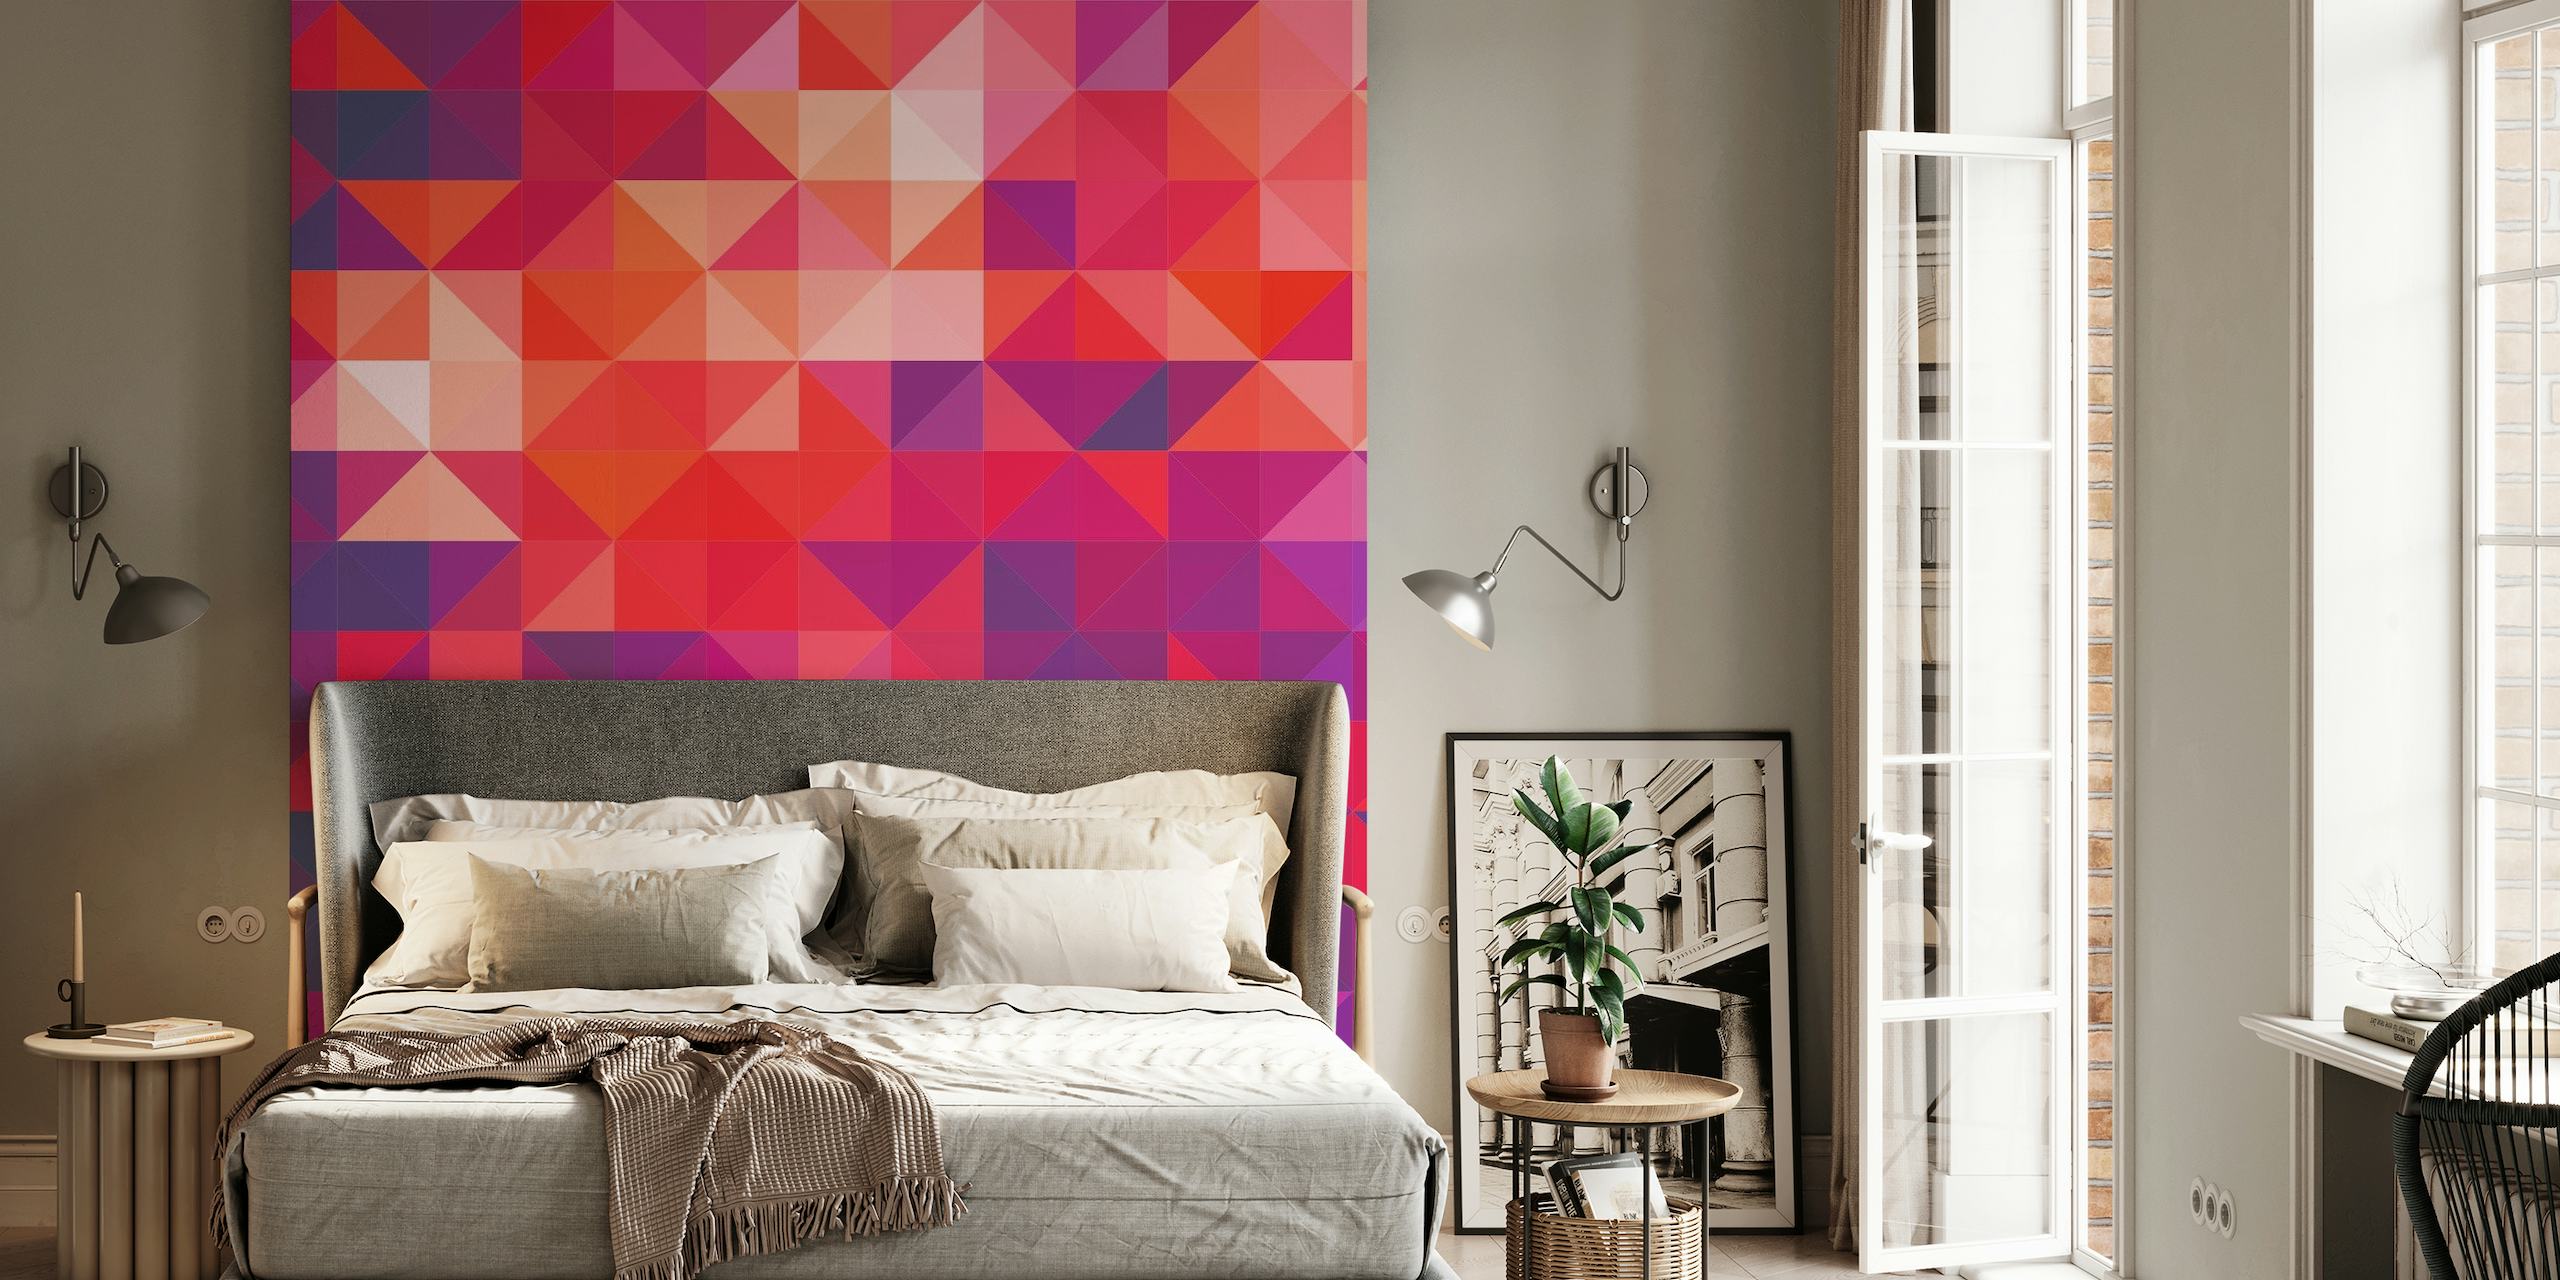 Geometric pattern wall mural with red, purple, and pink triangles